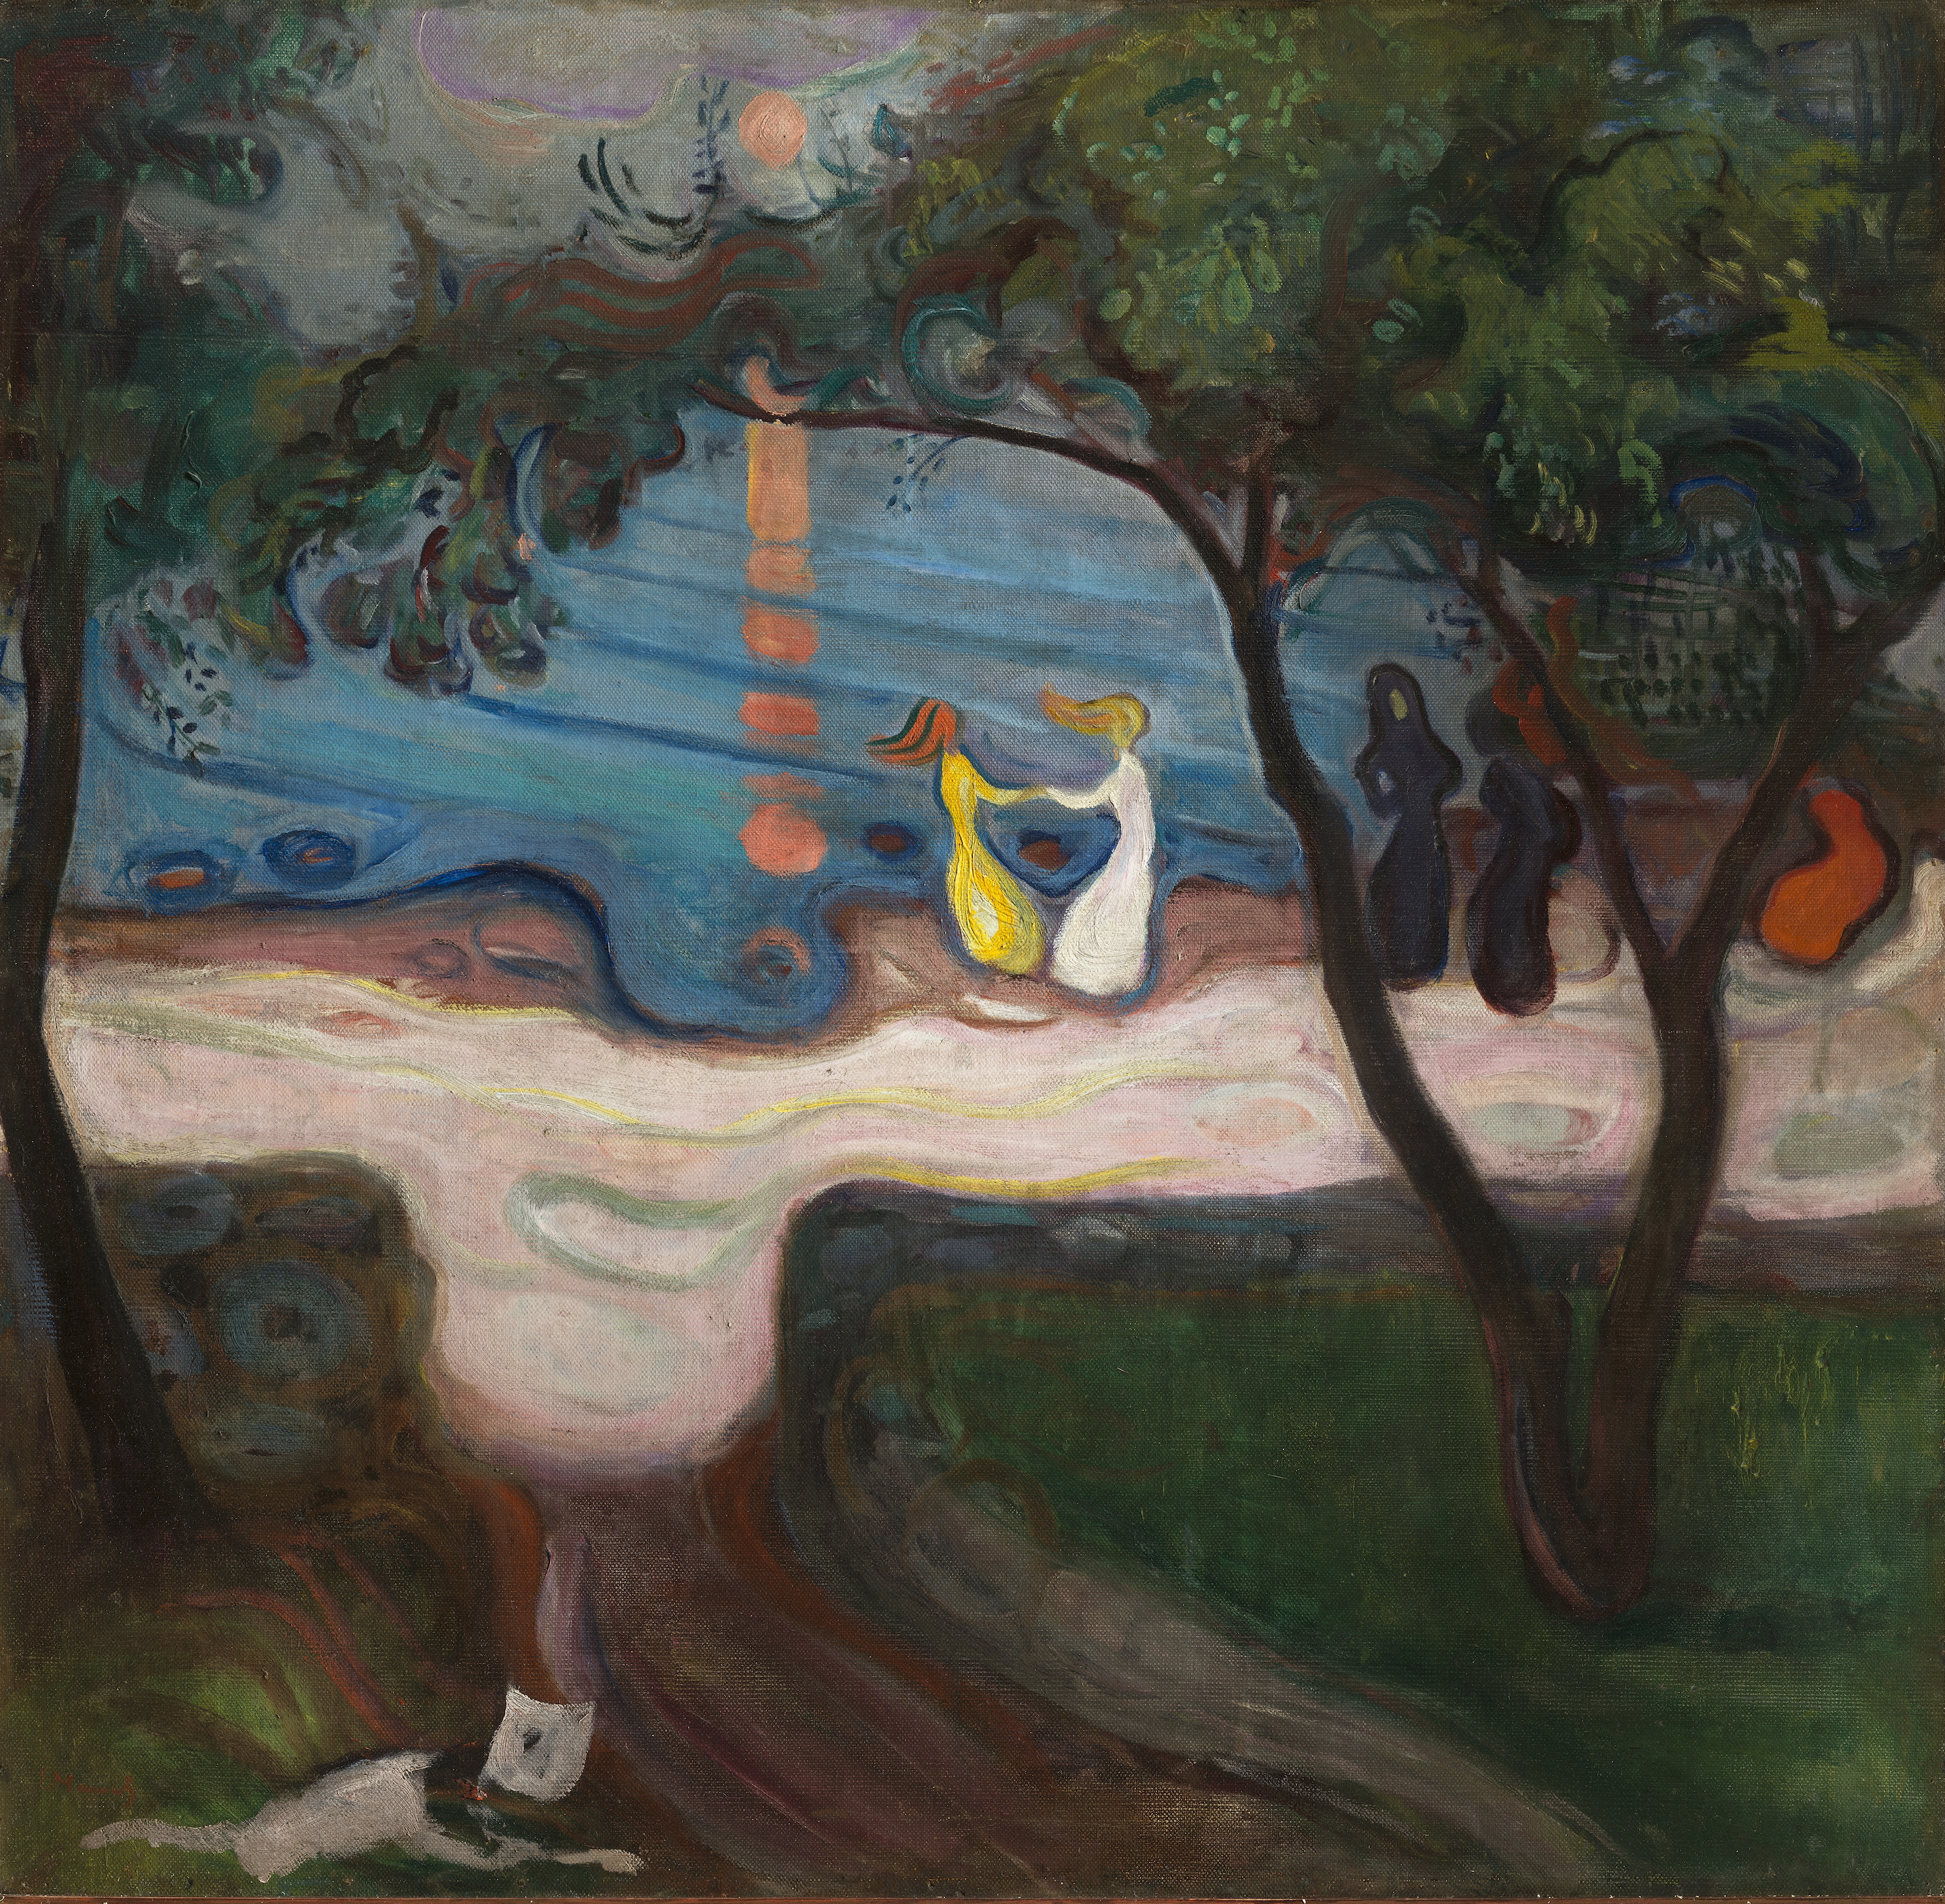 Dancing on a Shore by Edvard Munch - 1900 - 95.5 x 98.5 cm National Gallery in Prague